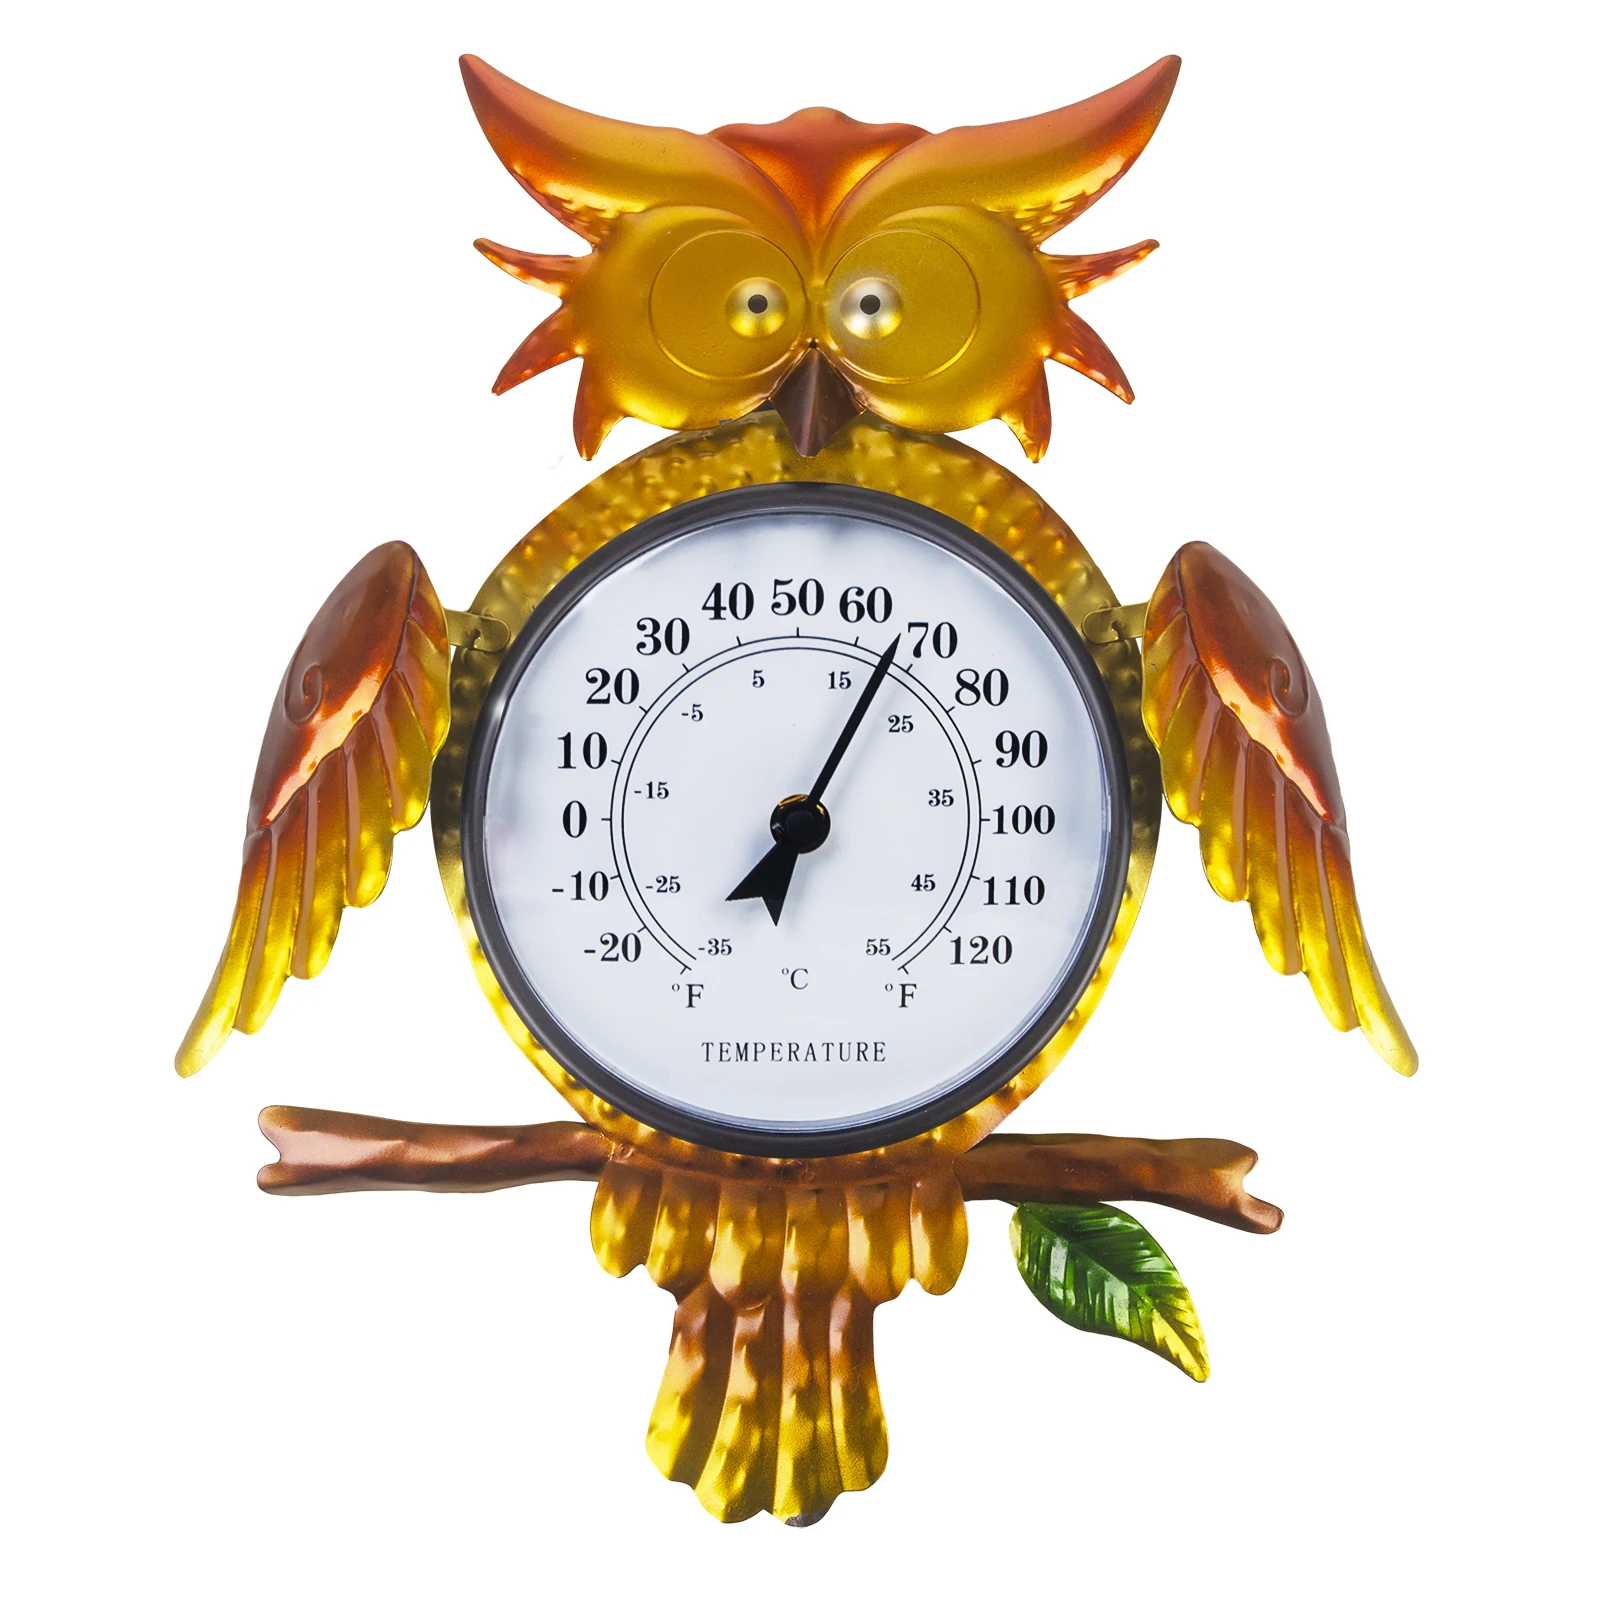 Outdoor Thermometers for Patio, Indoor Outdoor Thermometer Decorative Wall Mount Owl Thermometer for Home Garden Decor